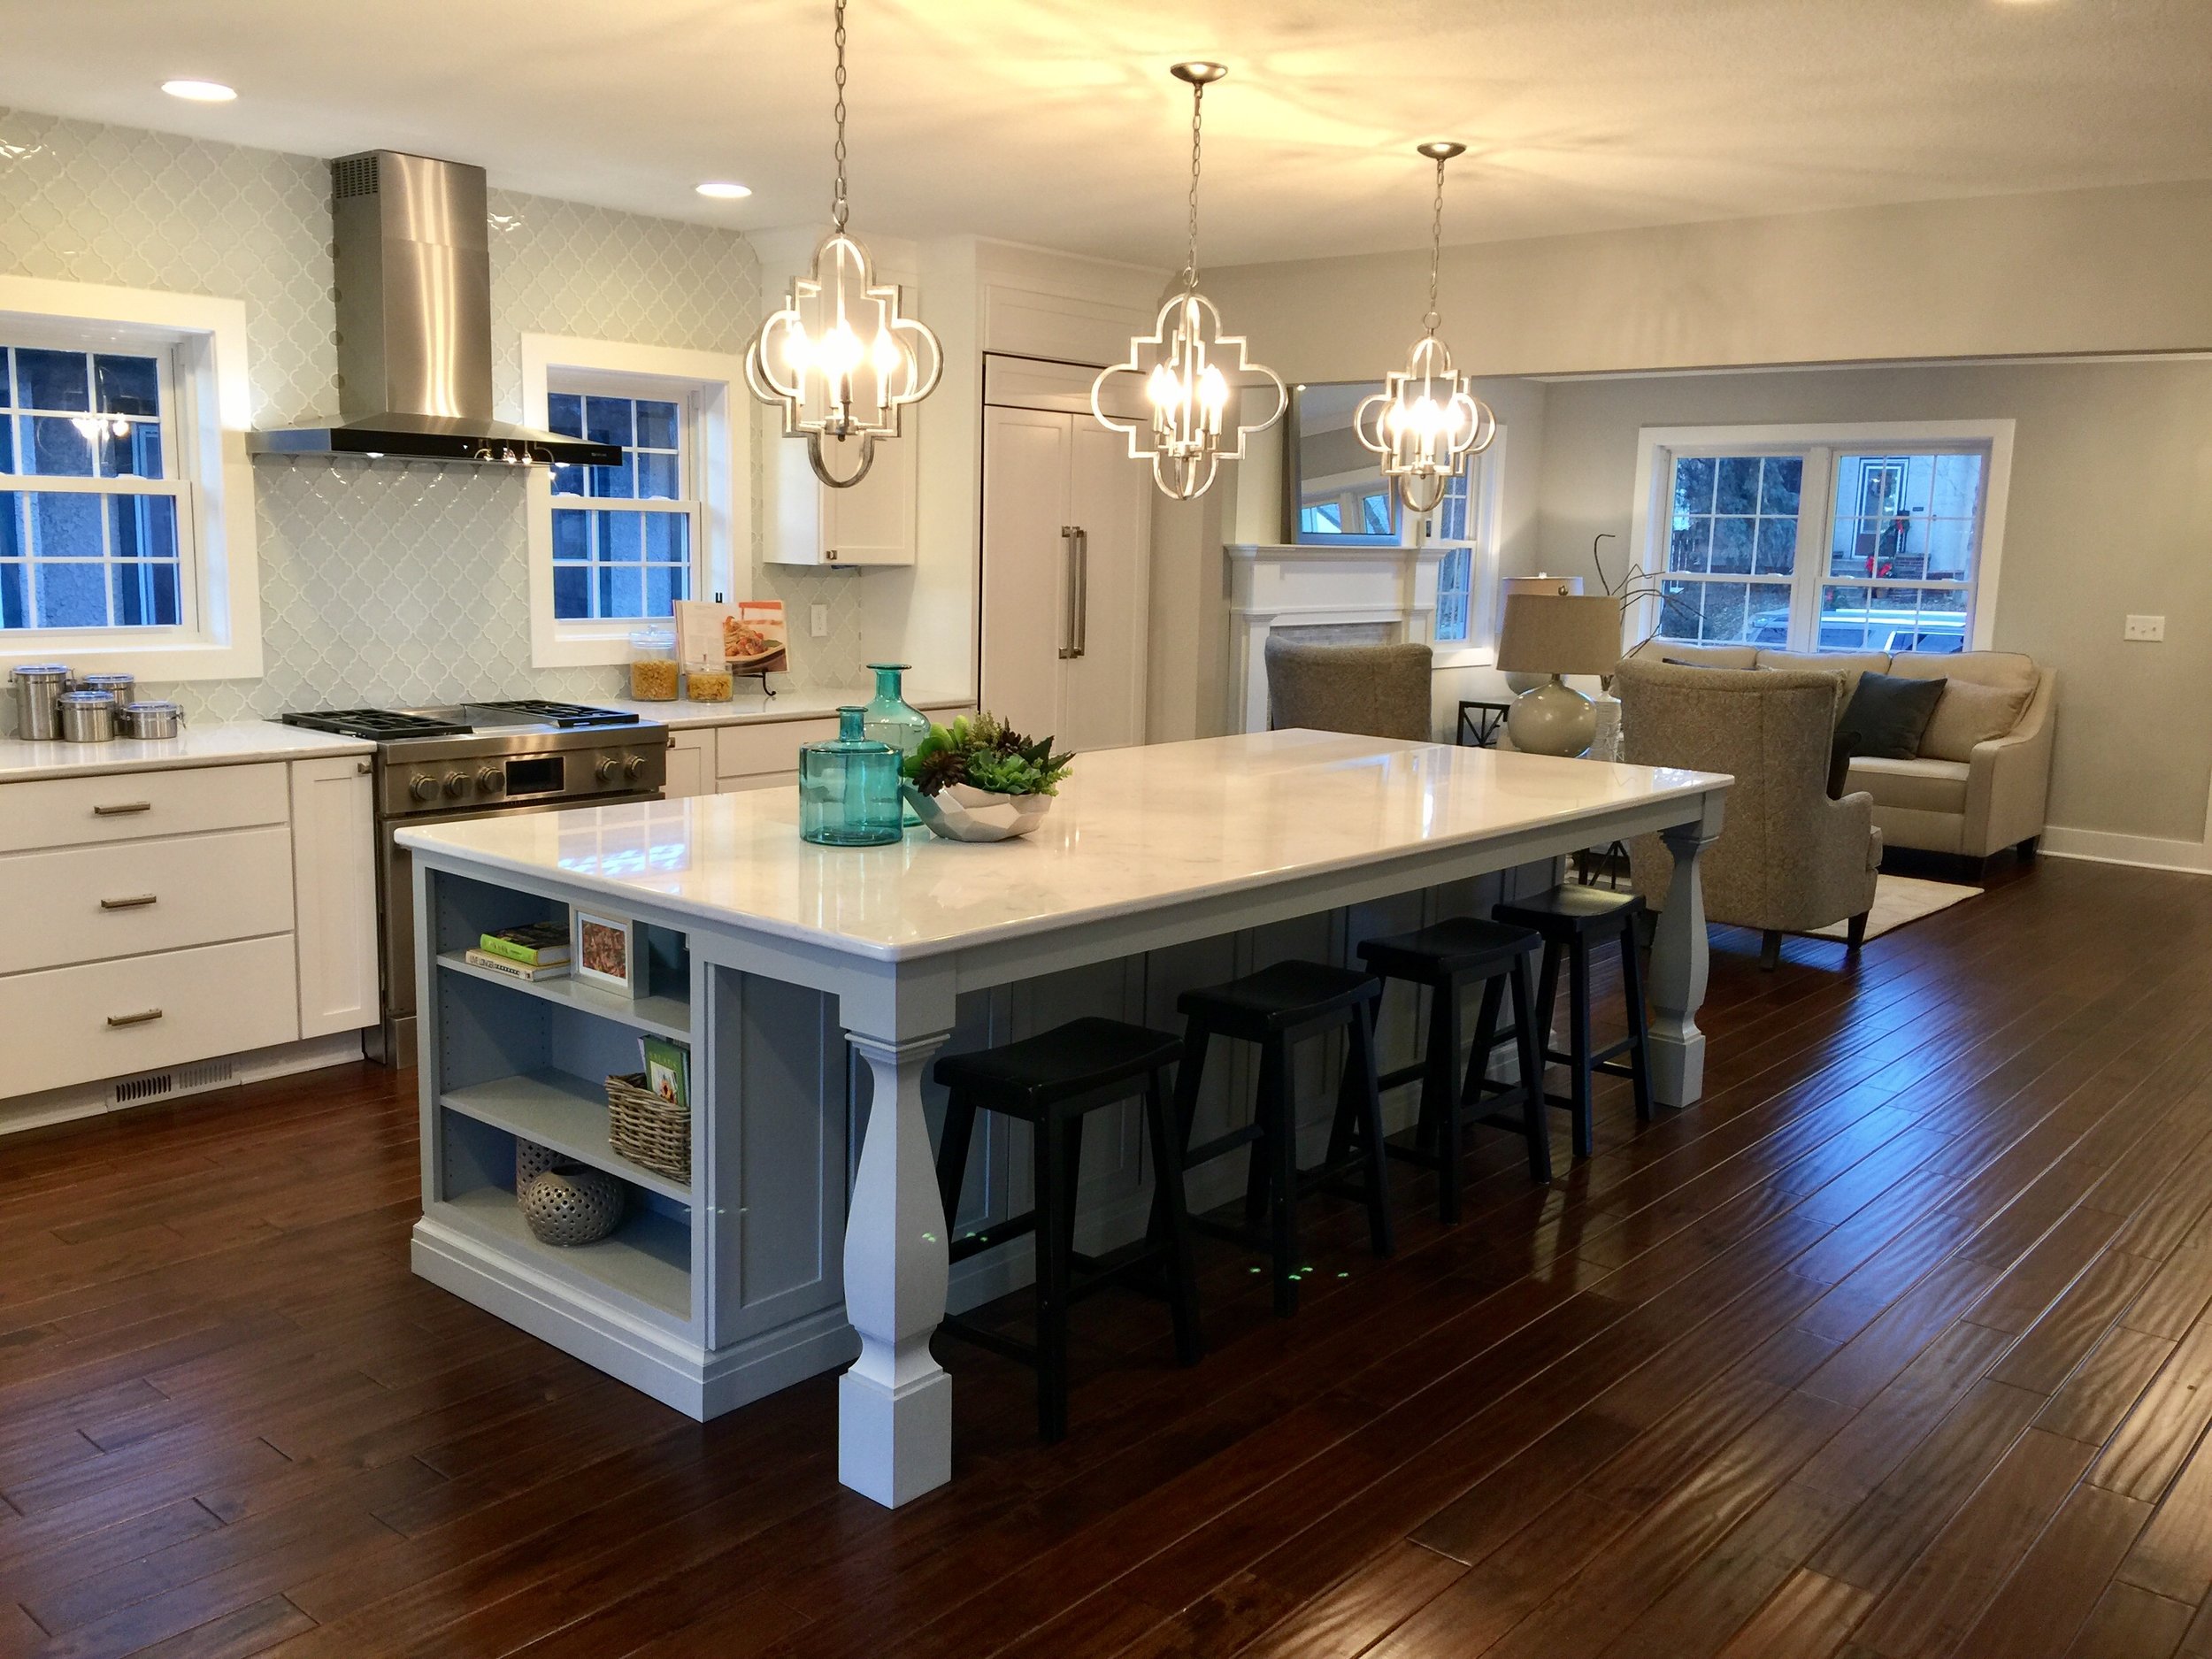 How To Choose The Best Pendant Lighting, What Type Of Lighting Is Best For Kitchen Island